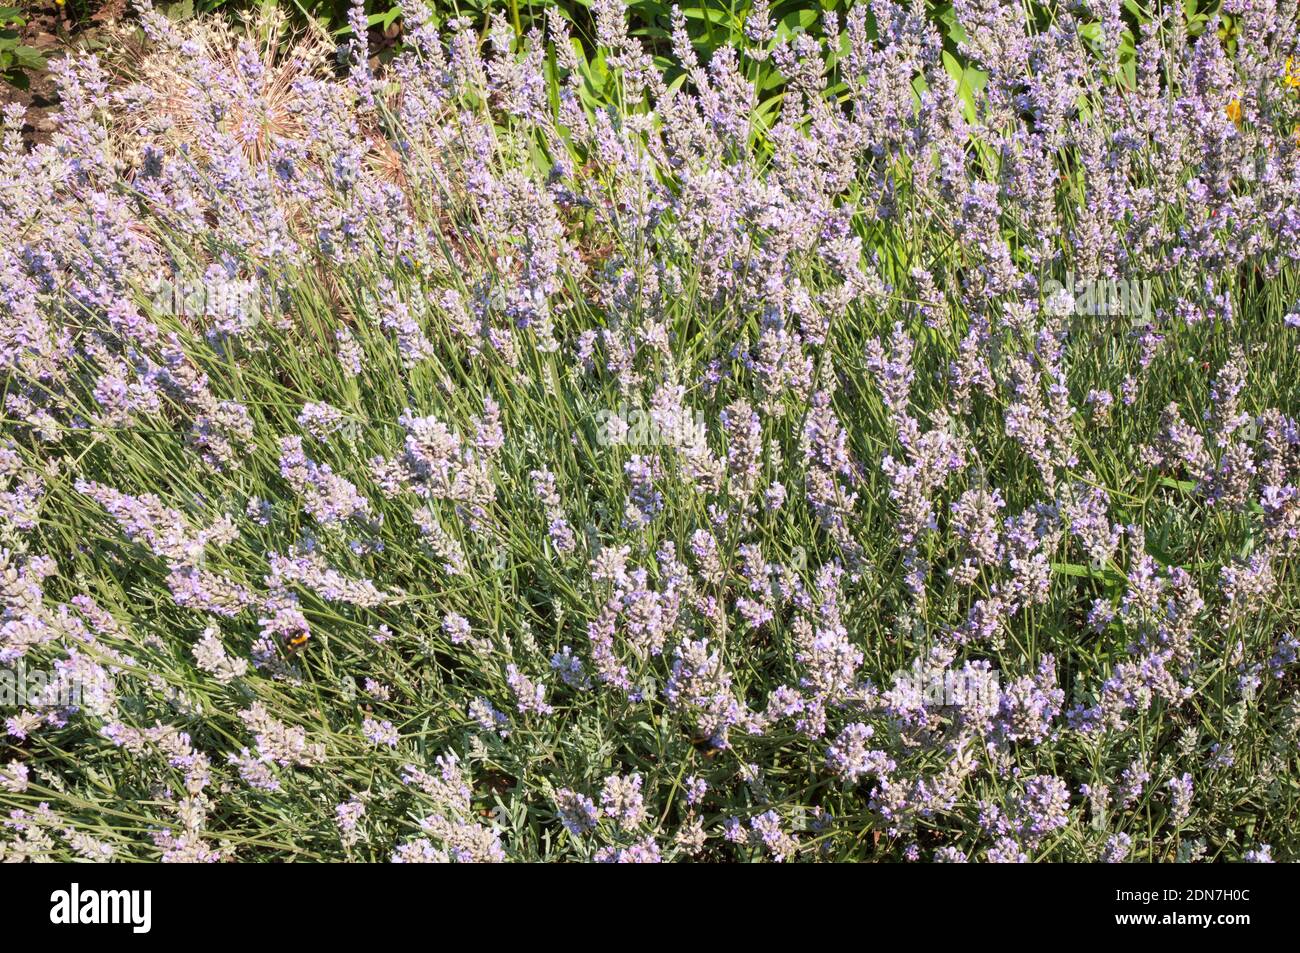 Lavandula Lavender Munstead in flower growing along the edge of an herbaceous border in summer A perennial evergreen shrub that is frost hardy Stock Photo